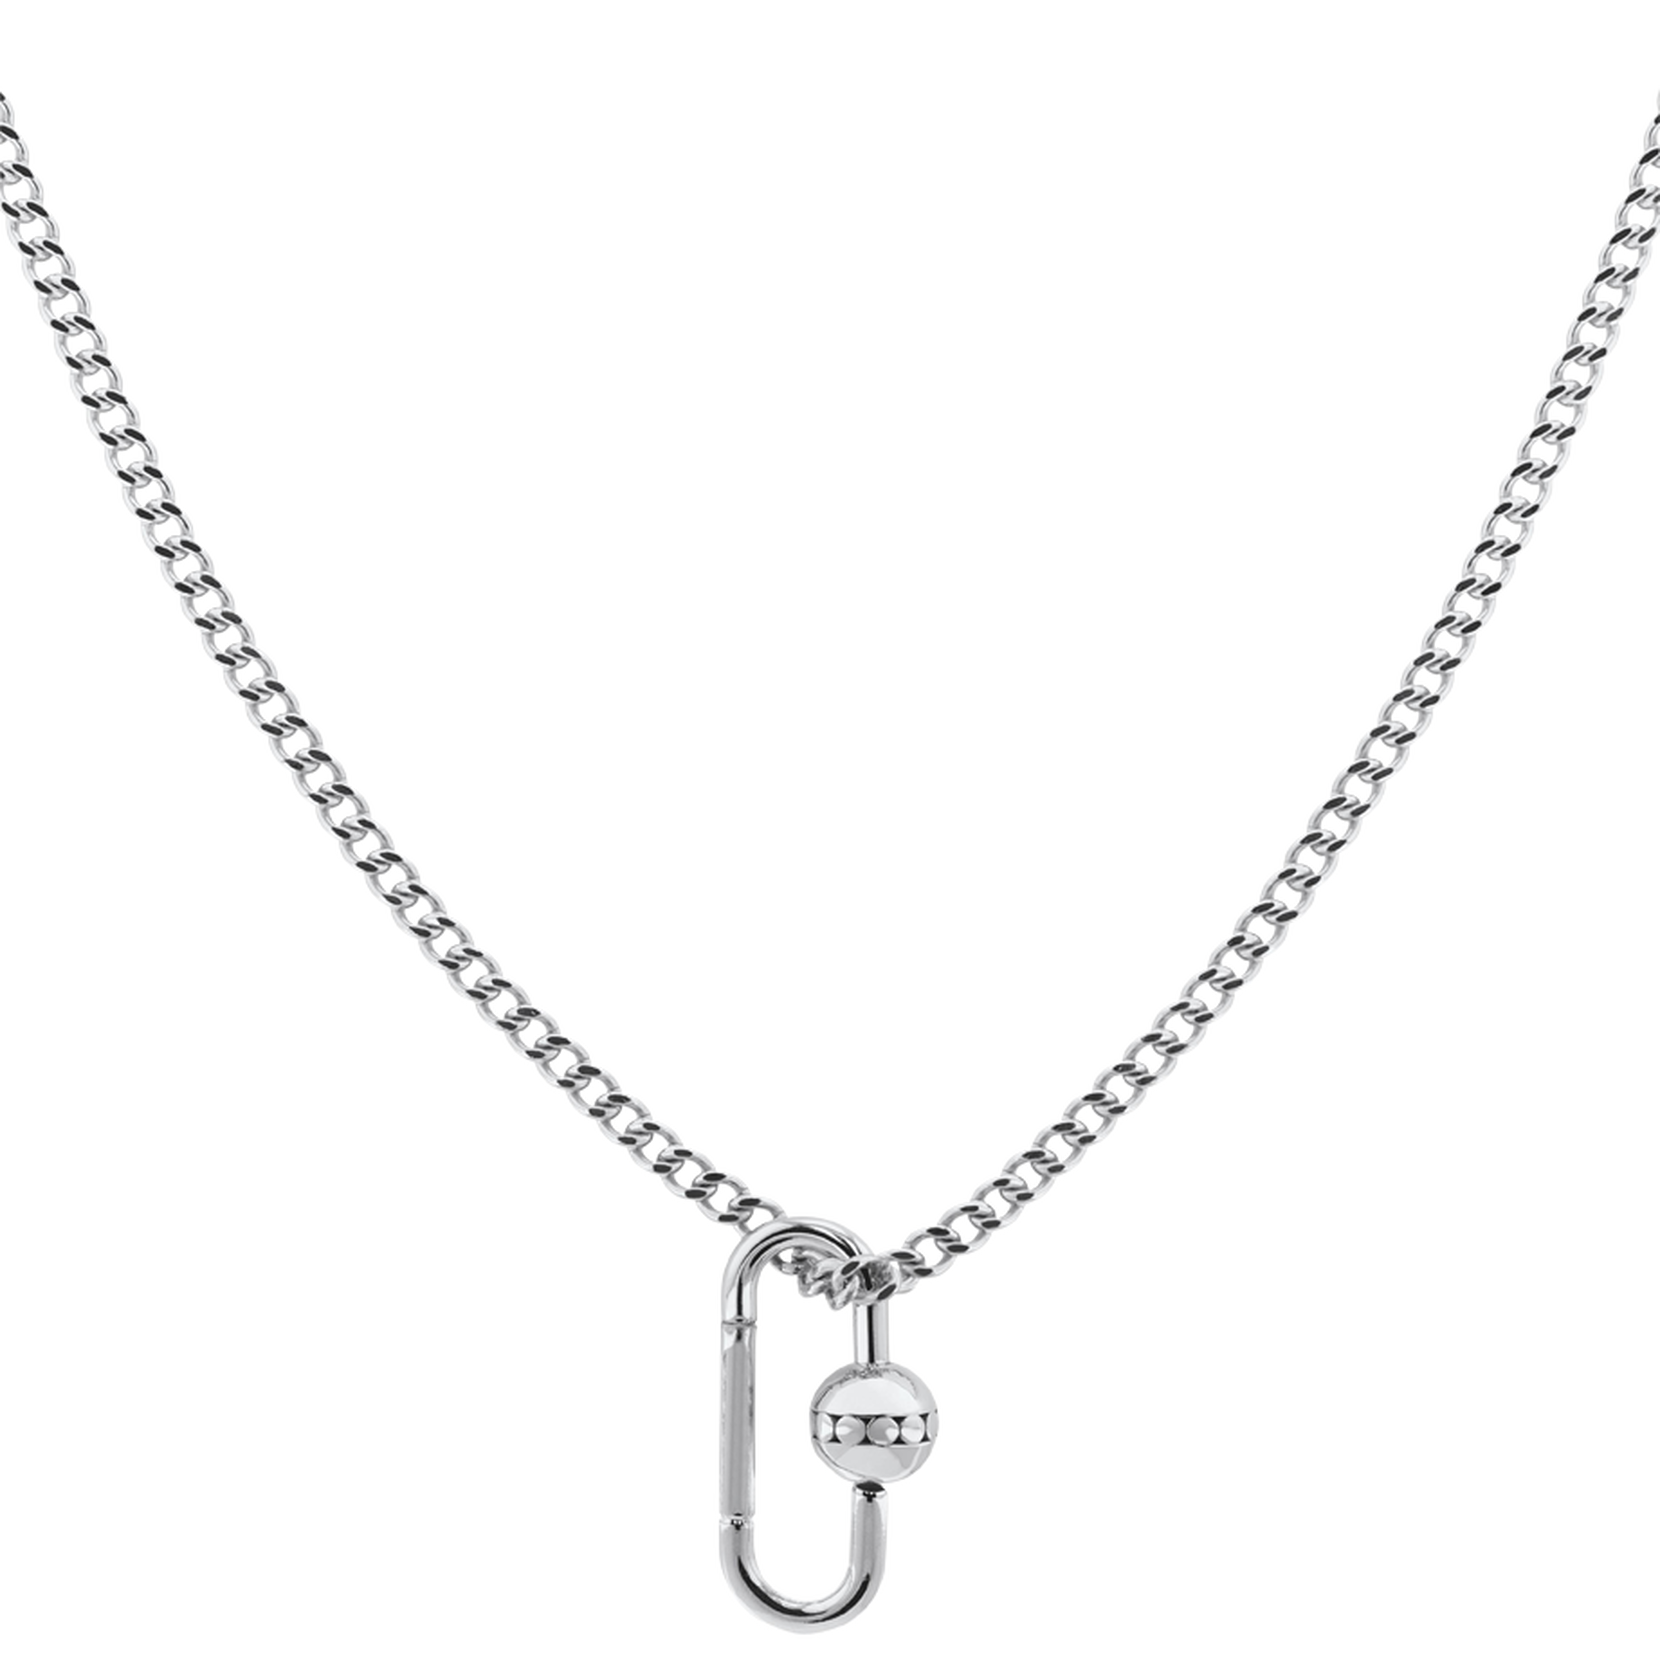 Movado | Sphere Lock Collection Sterling Silver Necklace with A Twisting Pendant